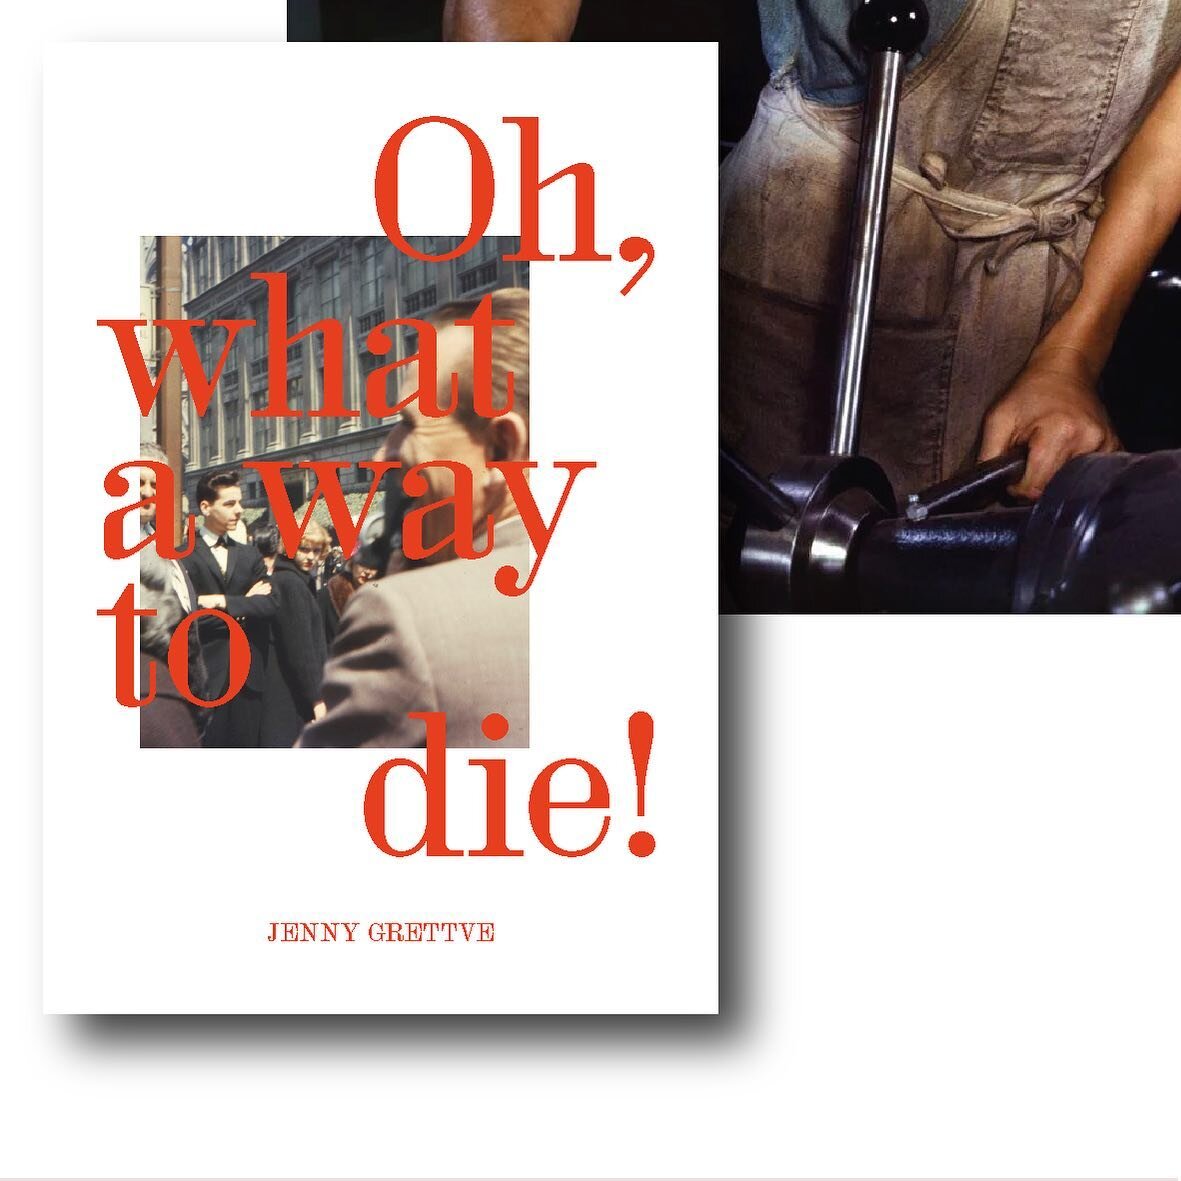 So very happy to share my new book! Will be found on andthekiosk.com soon🔜

&lsquo;Oh, what a way to die!&rsquo; is a brief exploration of modern manhood. Deteriorated ideas of masculinity &ndash;where self interest and profit are more desirable tha